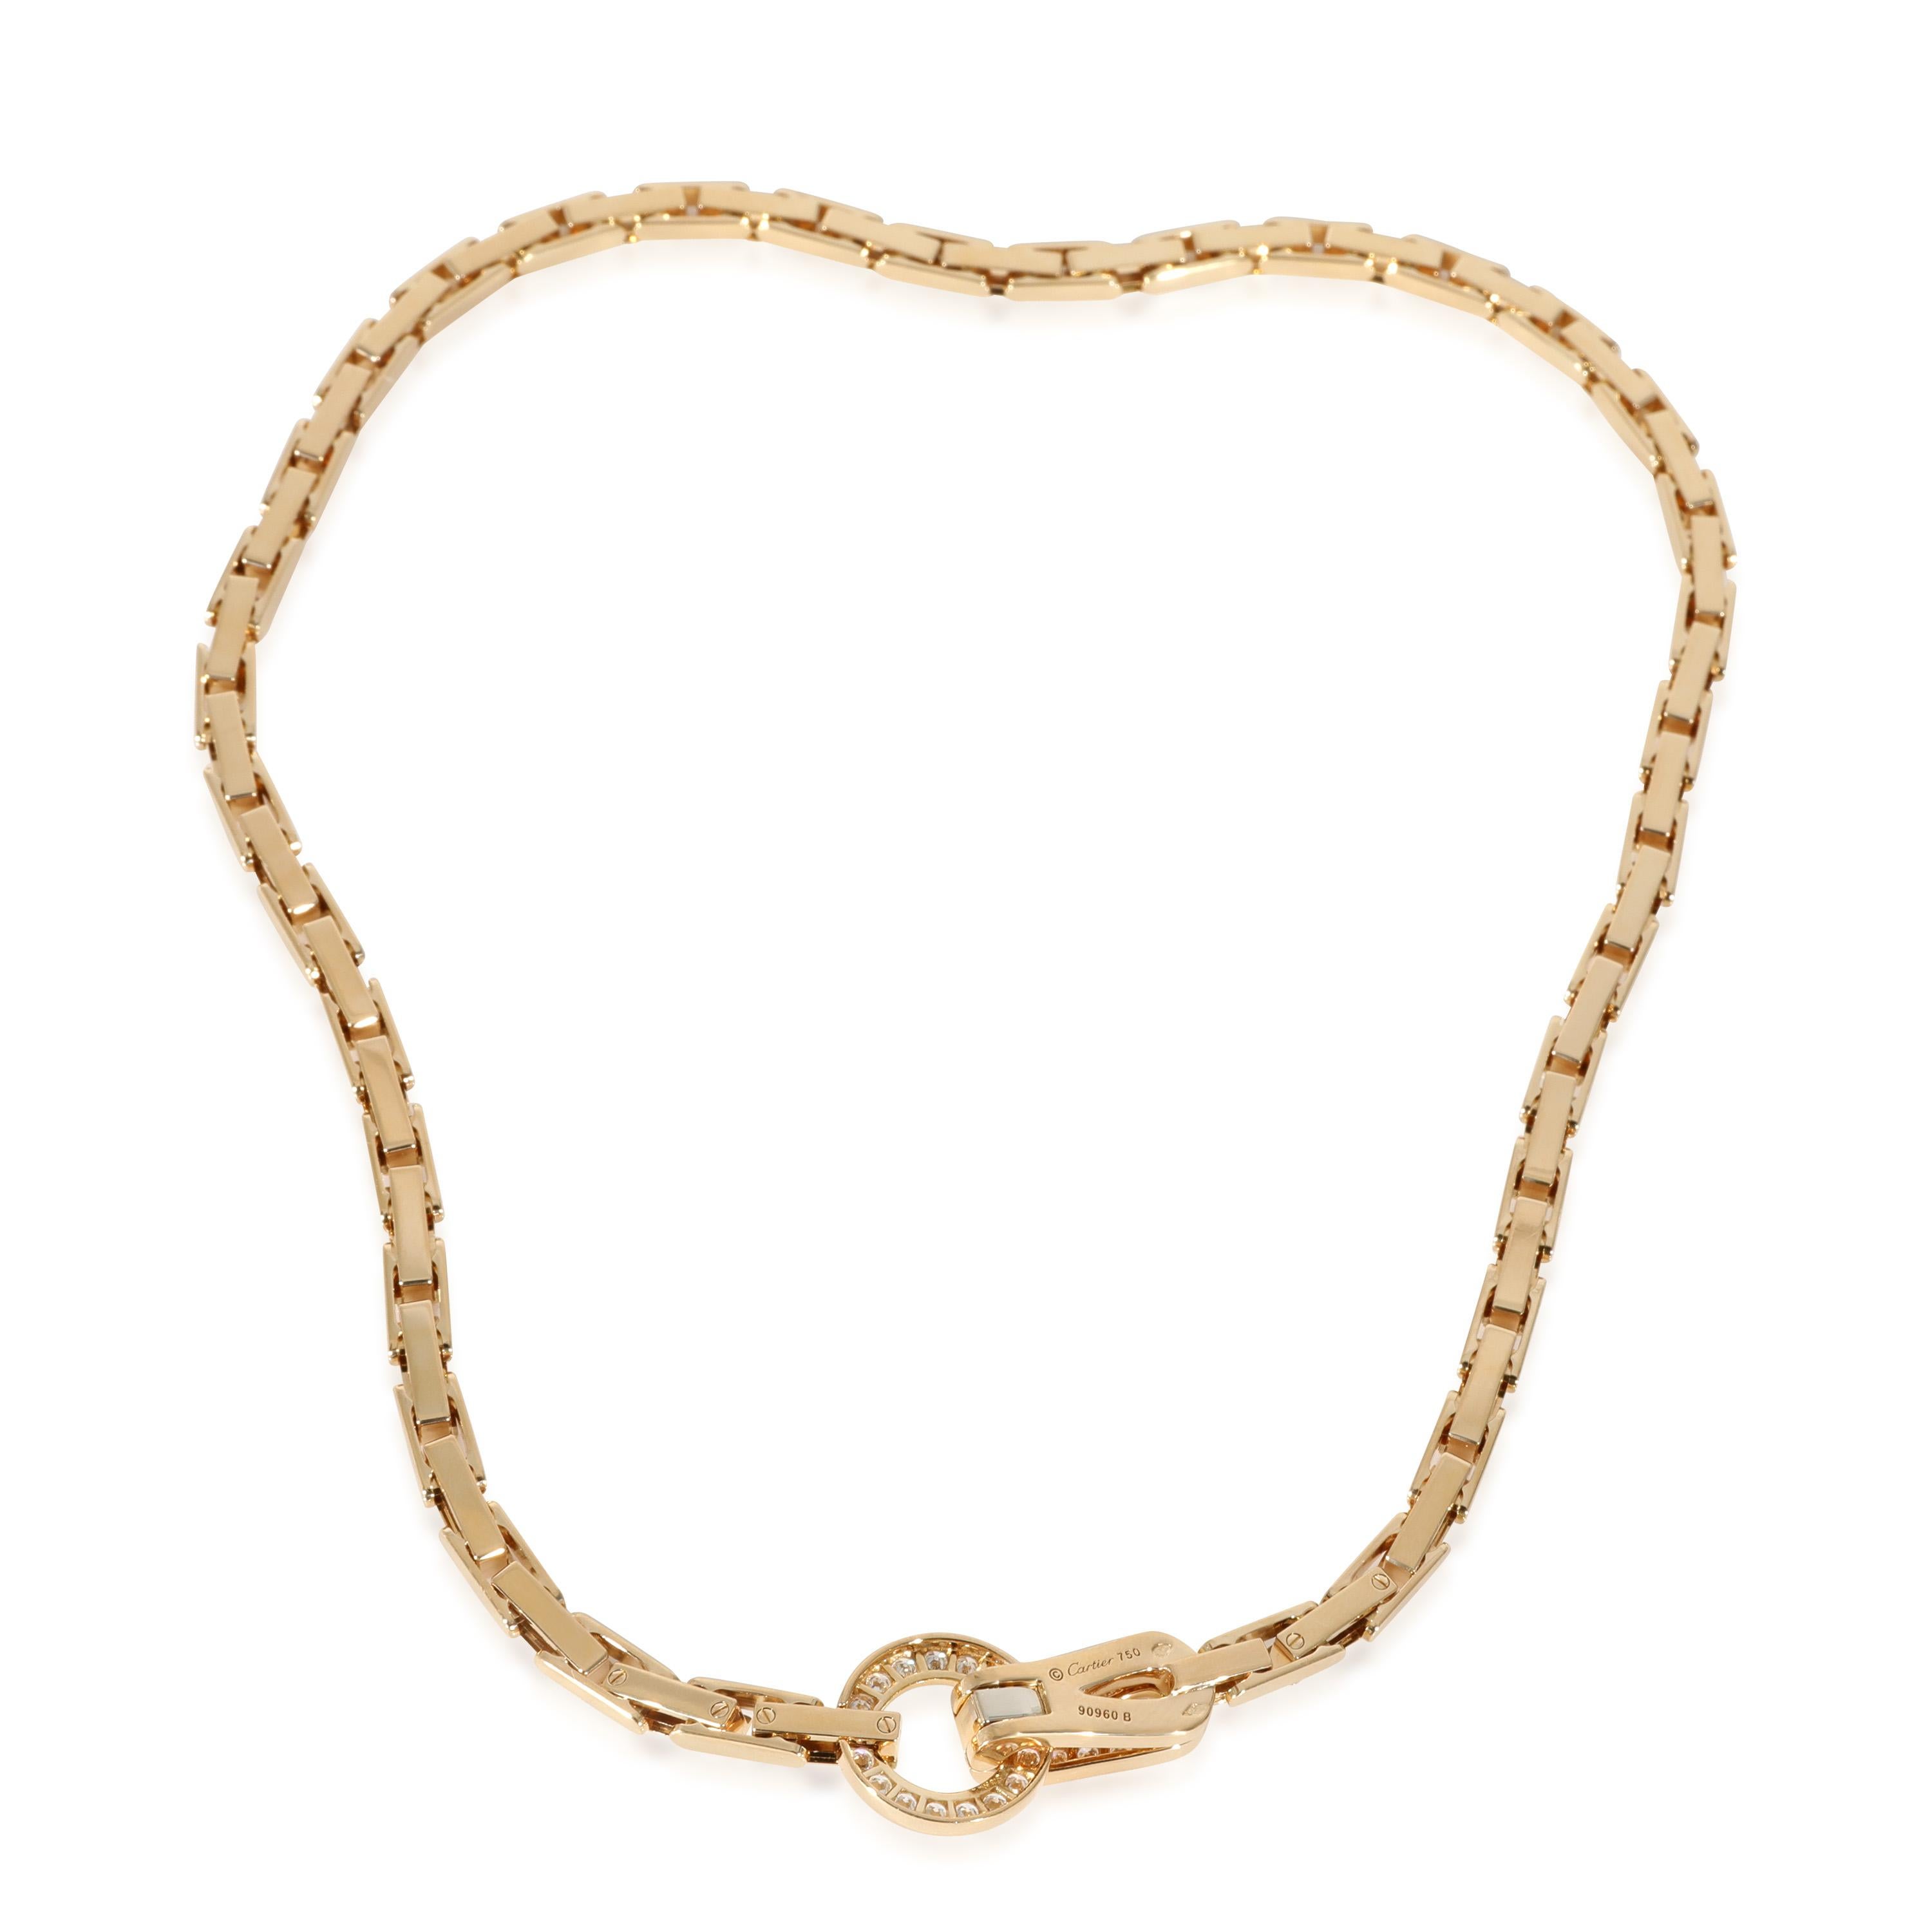 Cartier Agrafe Diamond Necklace in 18k Yellow Gold 1.1 CTW

PRIMARY DETAILS
SKU: 129640
Listing Title: Cartier Agrafe Diamond Necklace in 18k Yellow Gold 1.1 CTW
Condition Description: Influenced by haute couture design, the Agrafe collection from